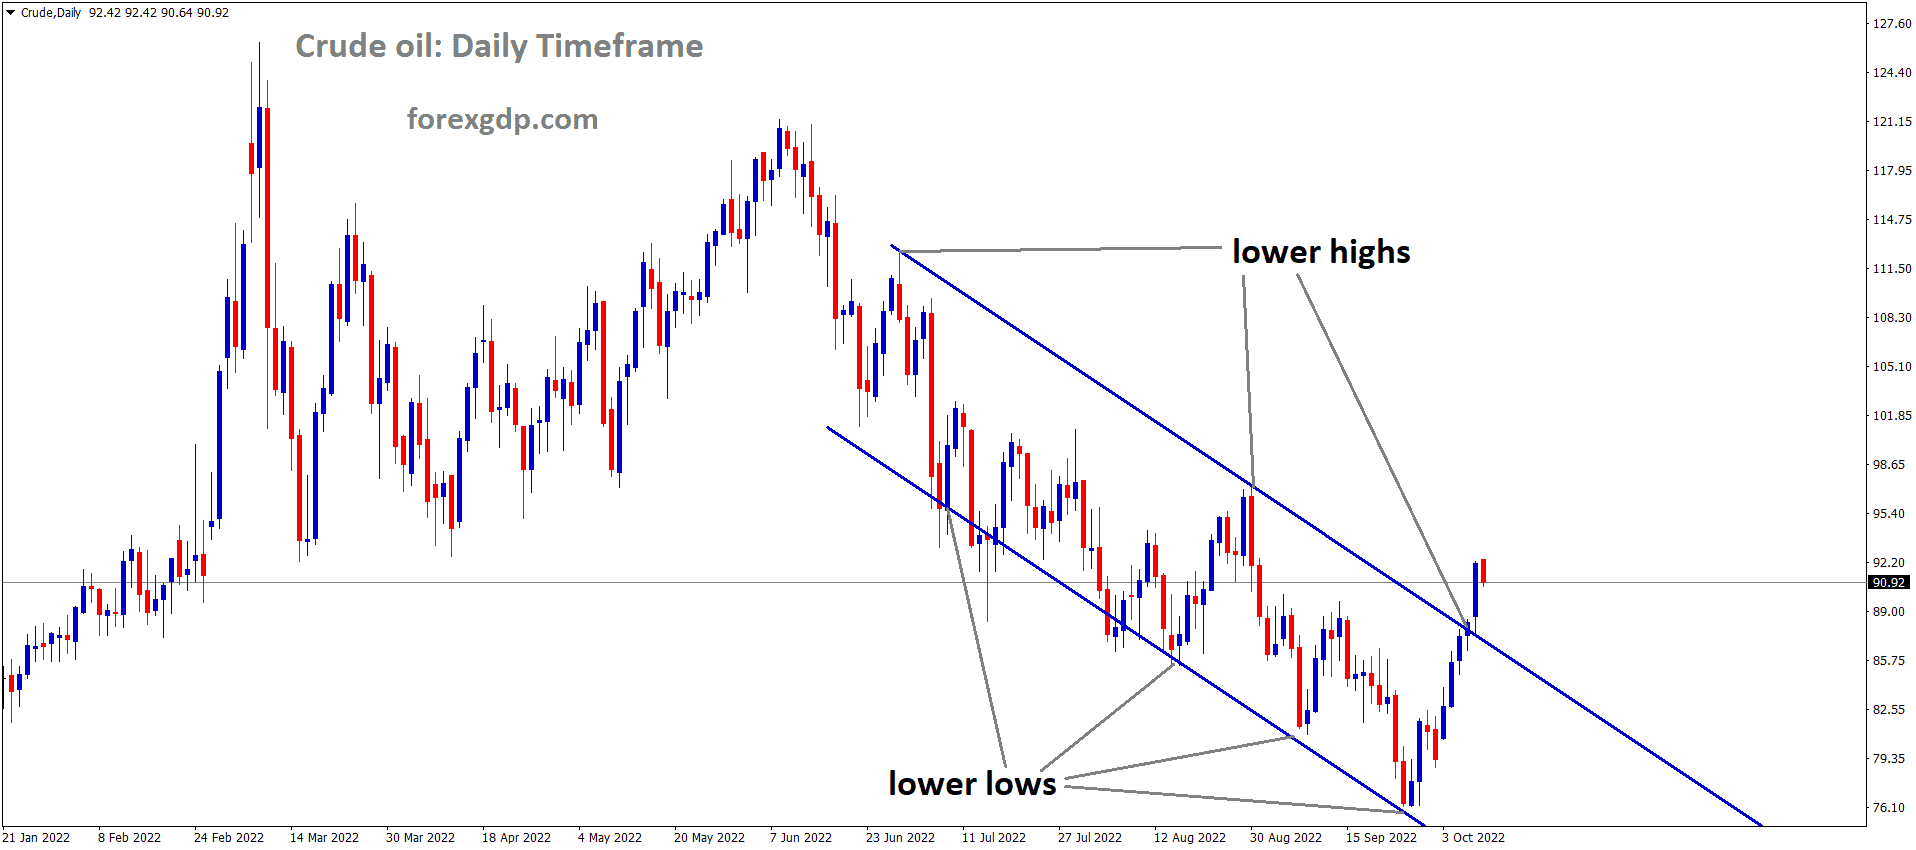 Crude Oil is moving in the Descending channel and the market has reached the lower high area of the channel 1